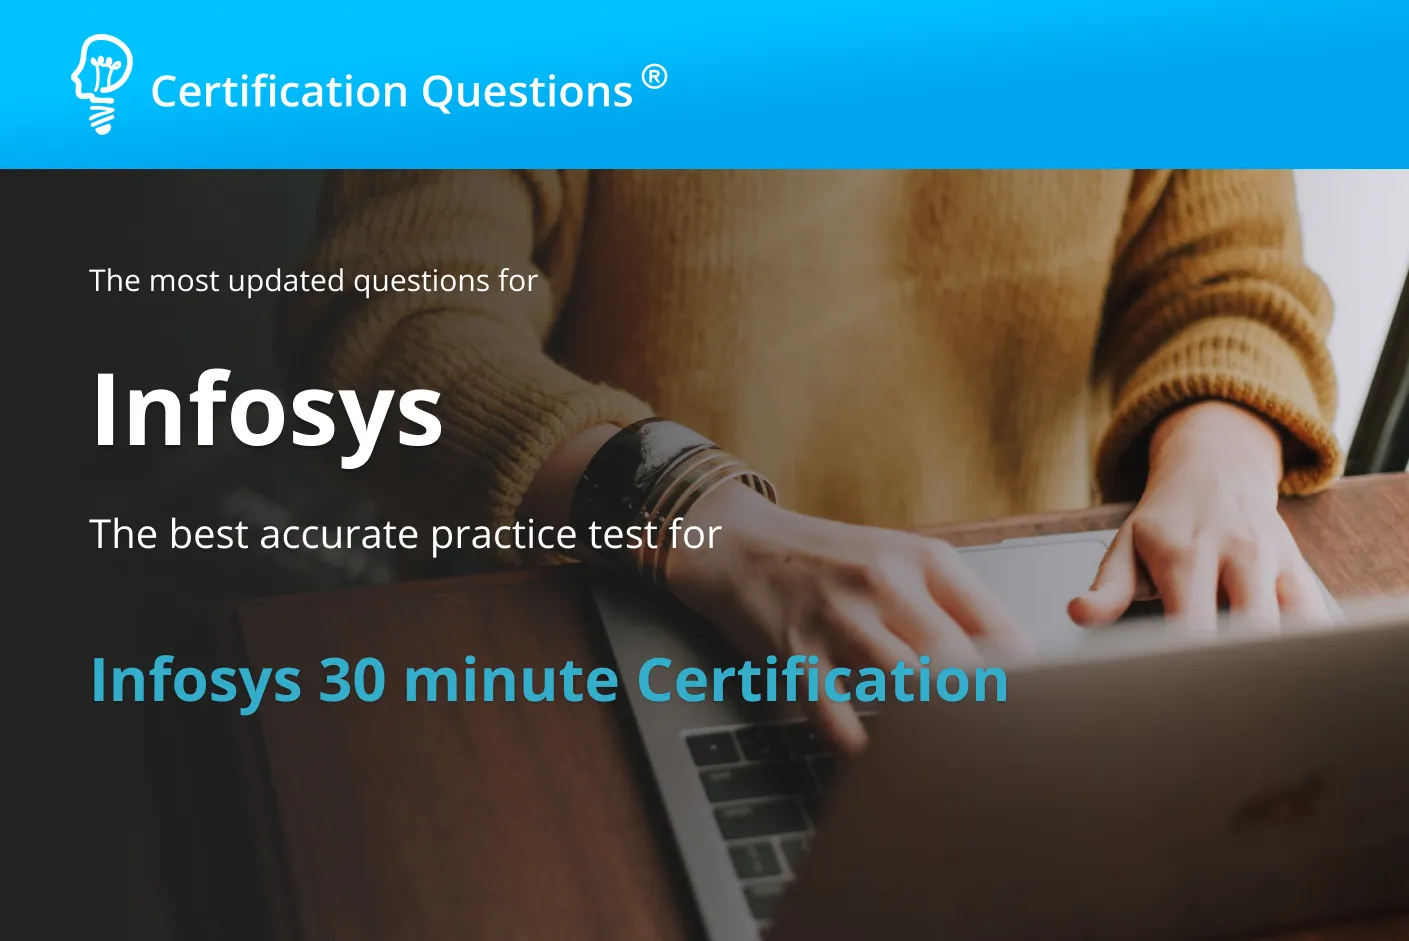 This image is related to Infosys 30 minute certification practice test Exam.